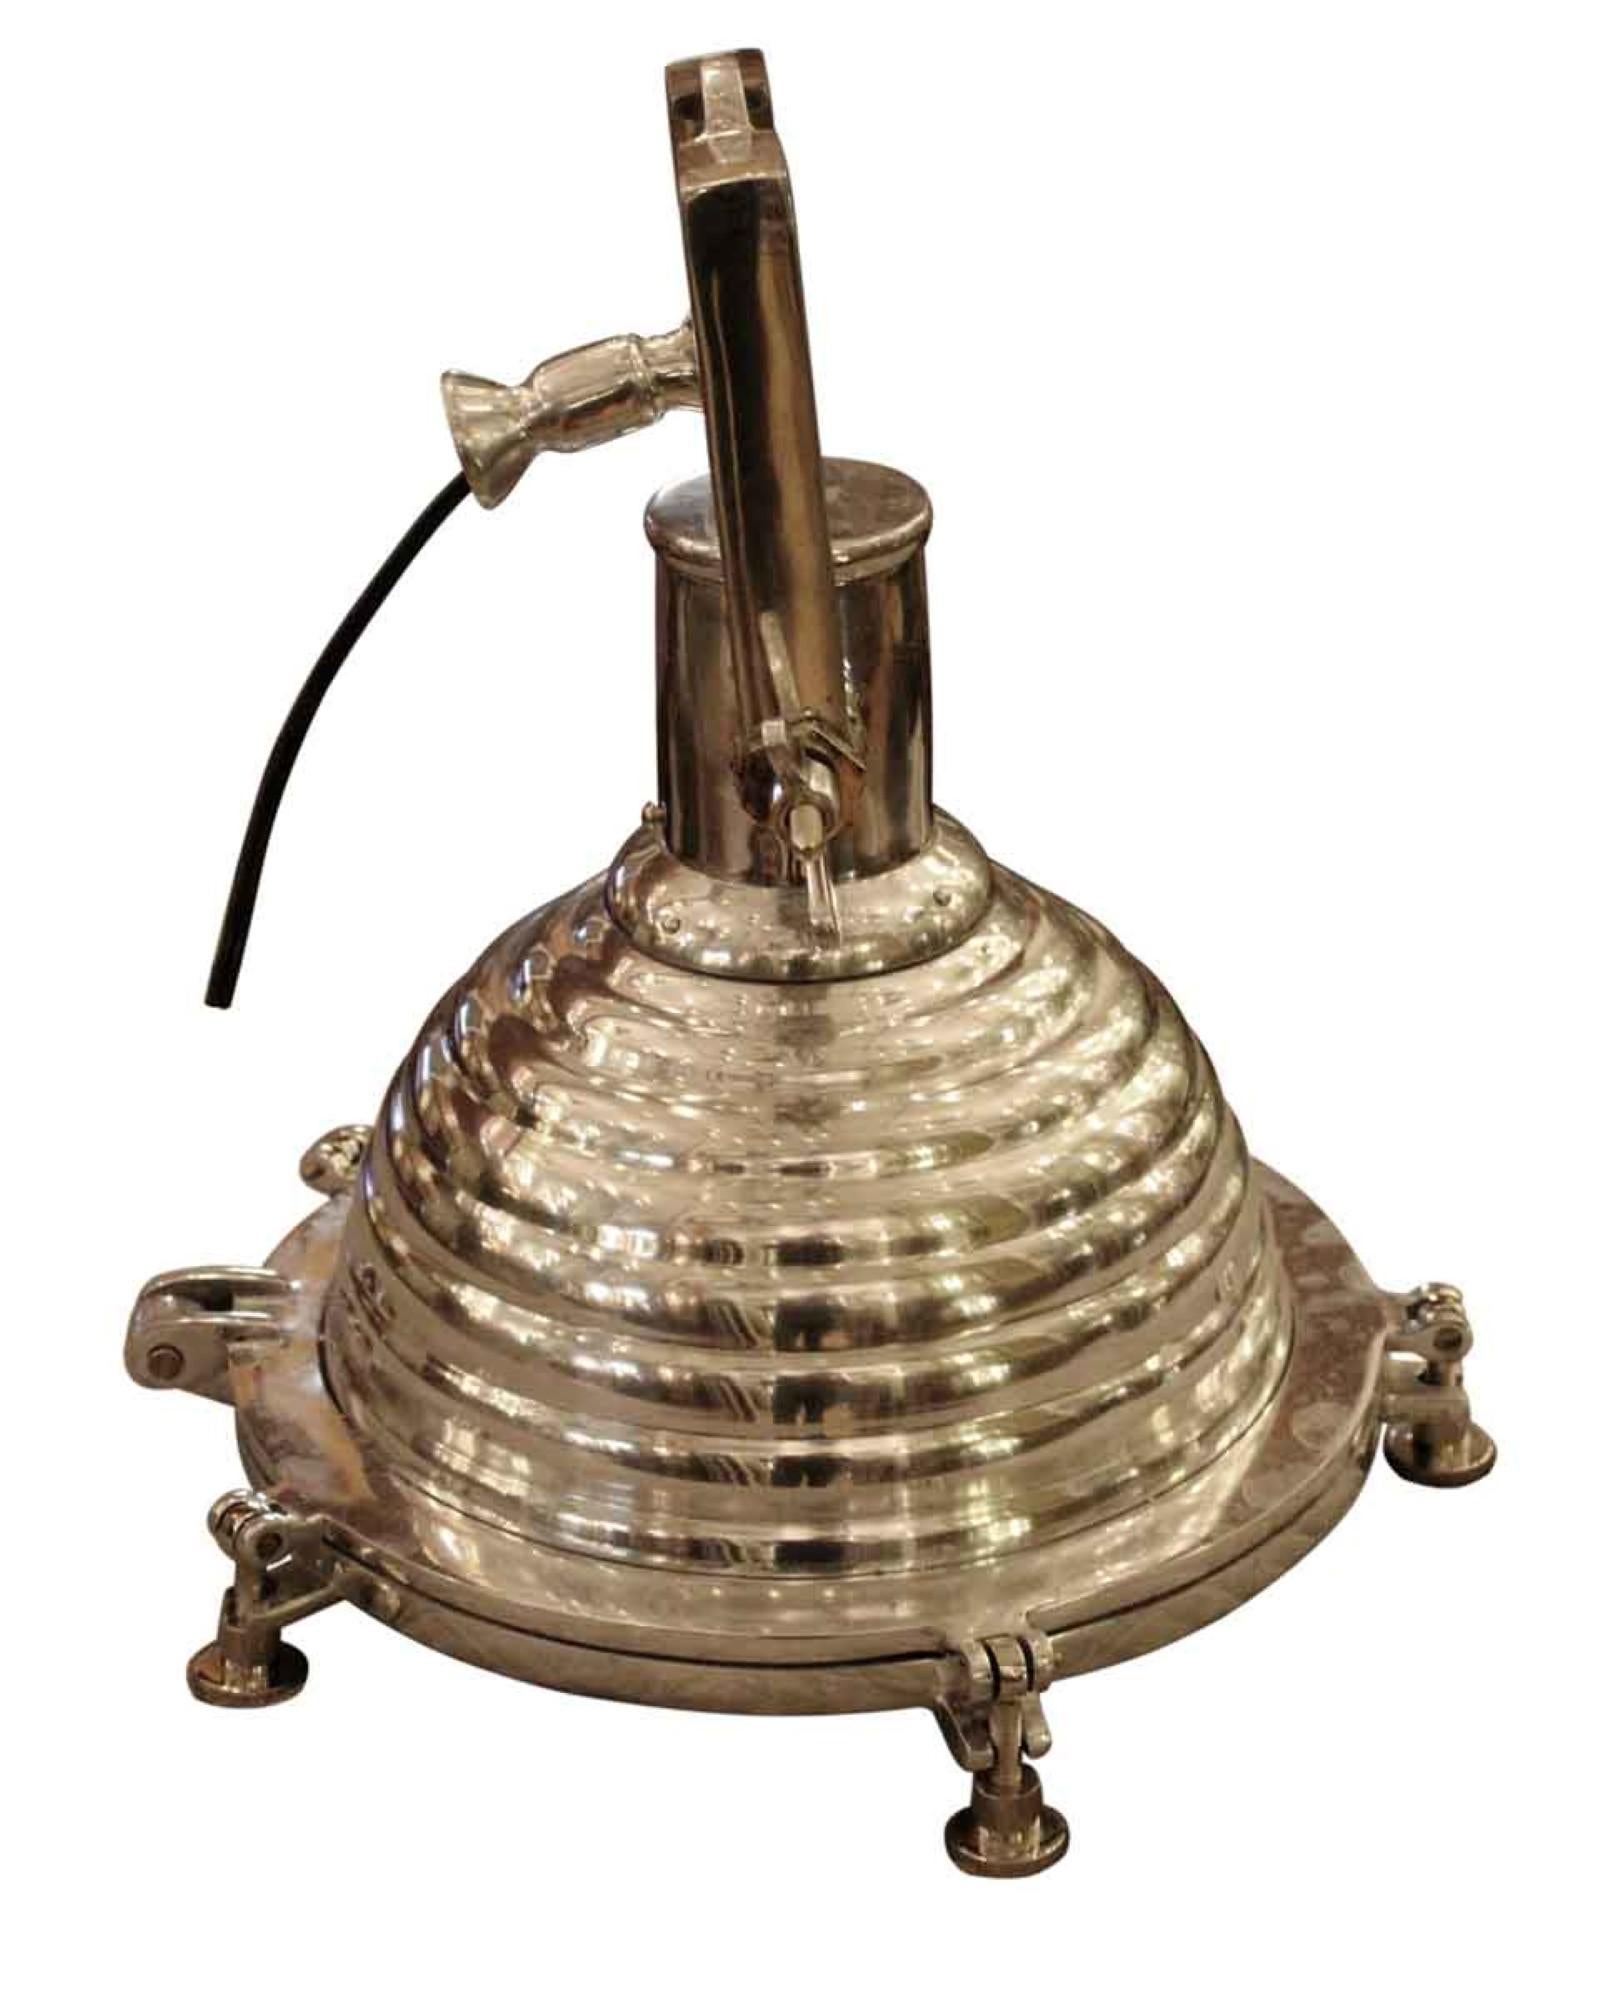 Replica of the nautical ship fox light in polished aluminum. Takes one bulb. Small quantity available at time of posting. Priced each. Please inquire. Please note, this item is located in our Scranton, PA location.